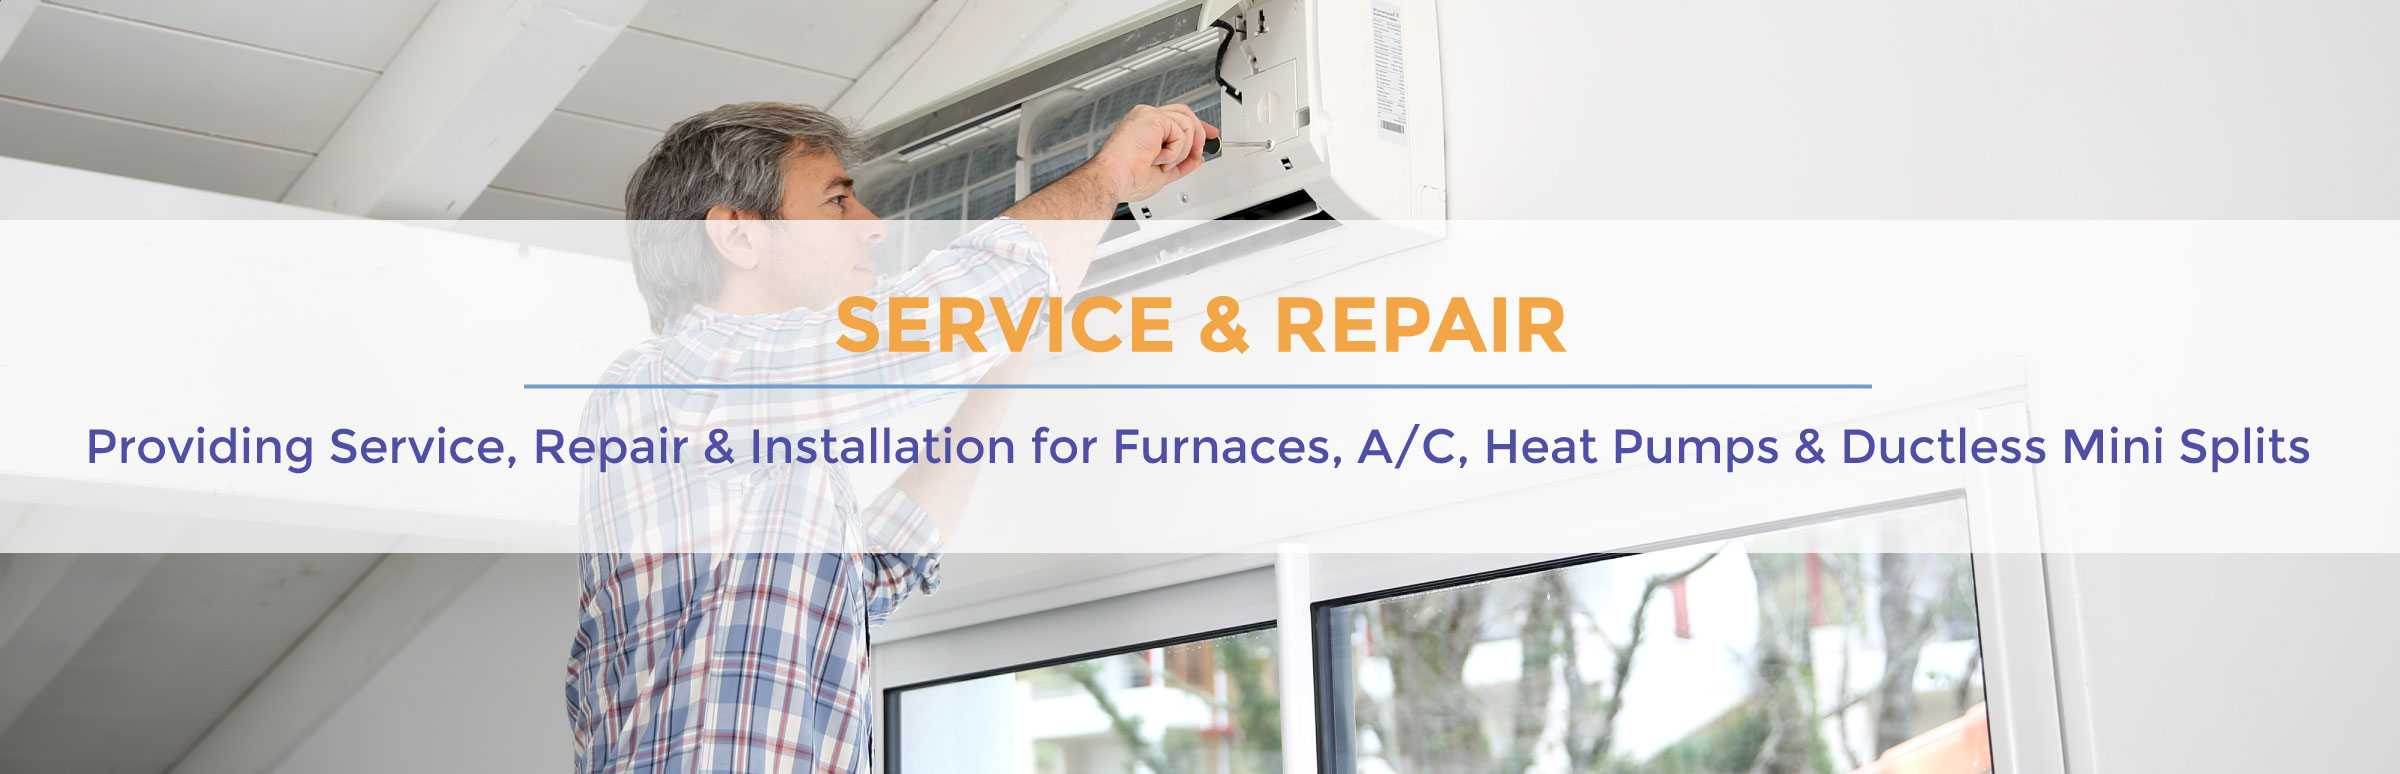 We provide service and repair for furnaces, air conditioners, ductless split systems and heat pumps!